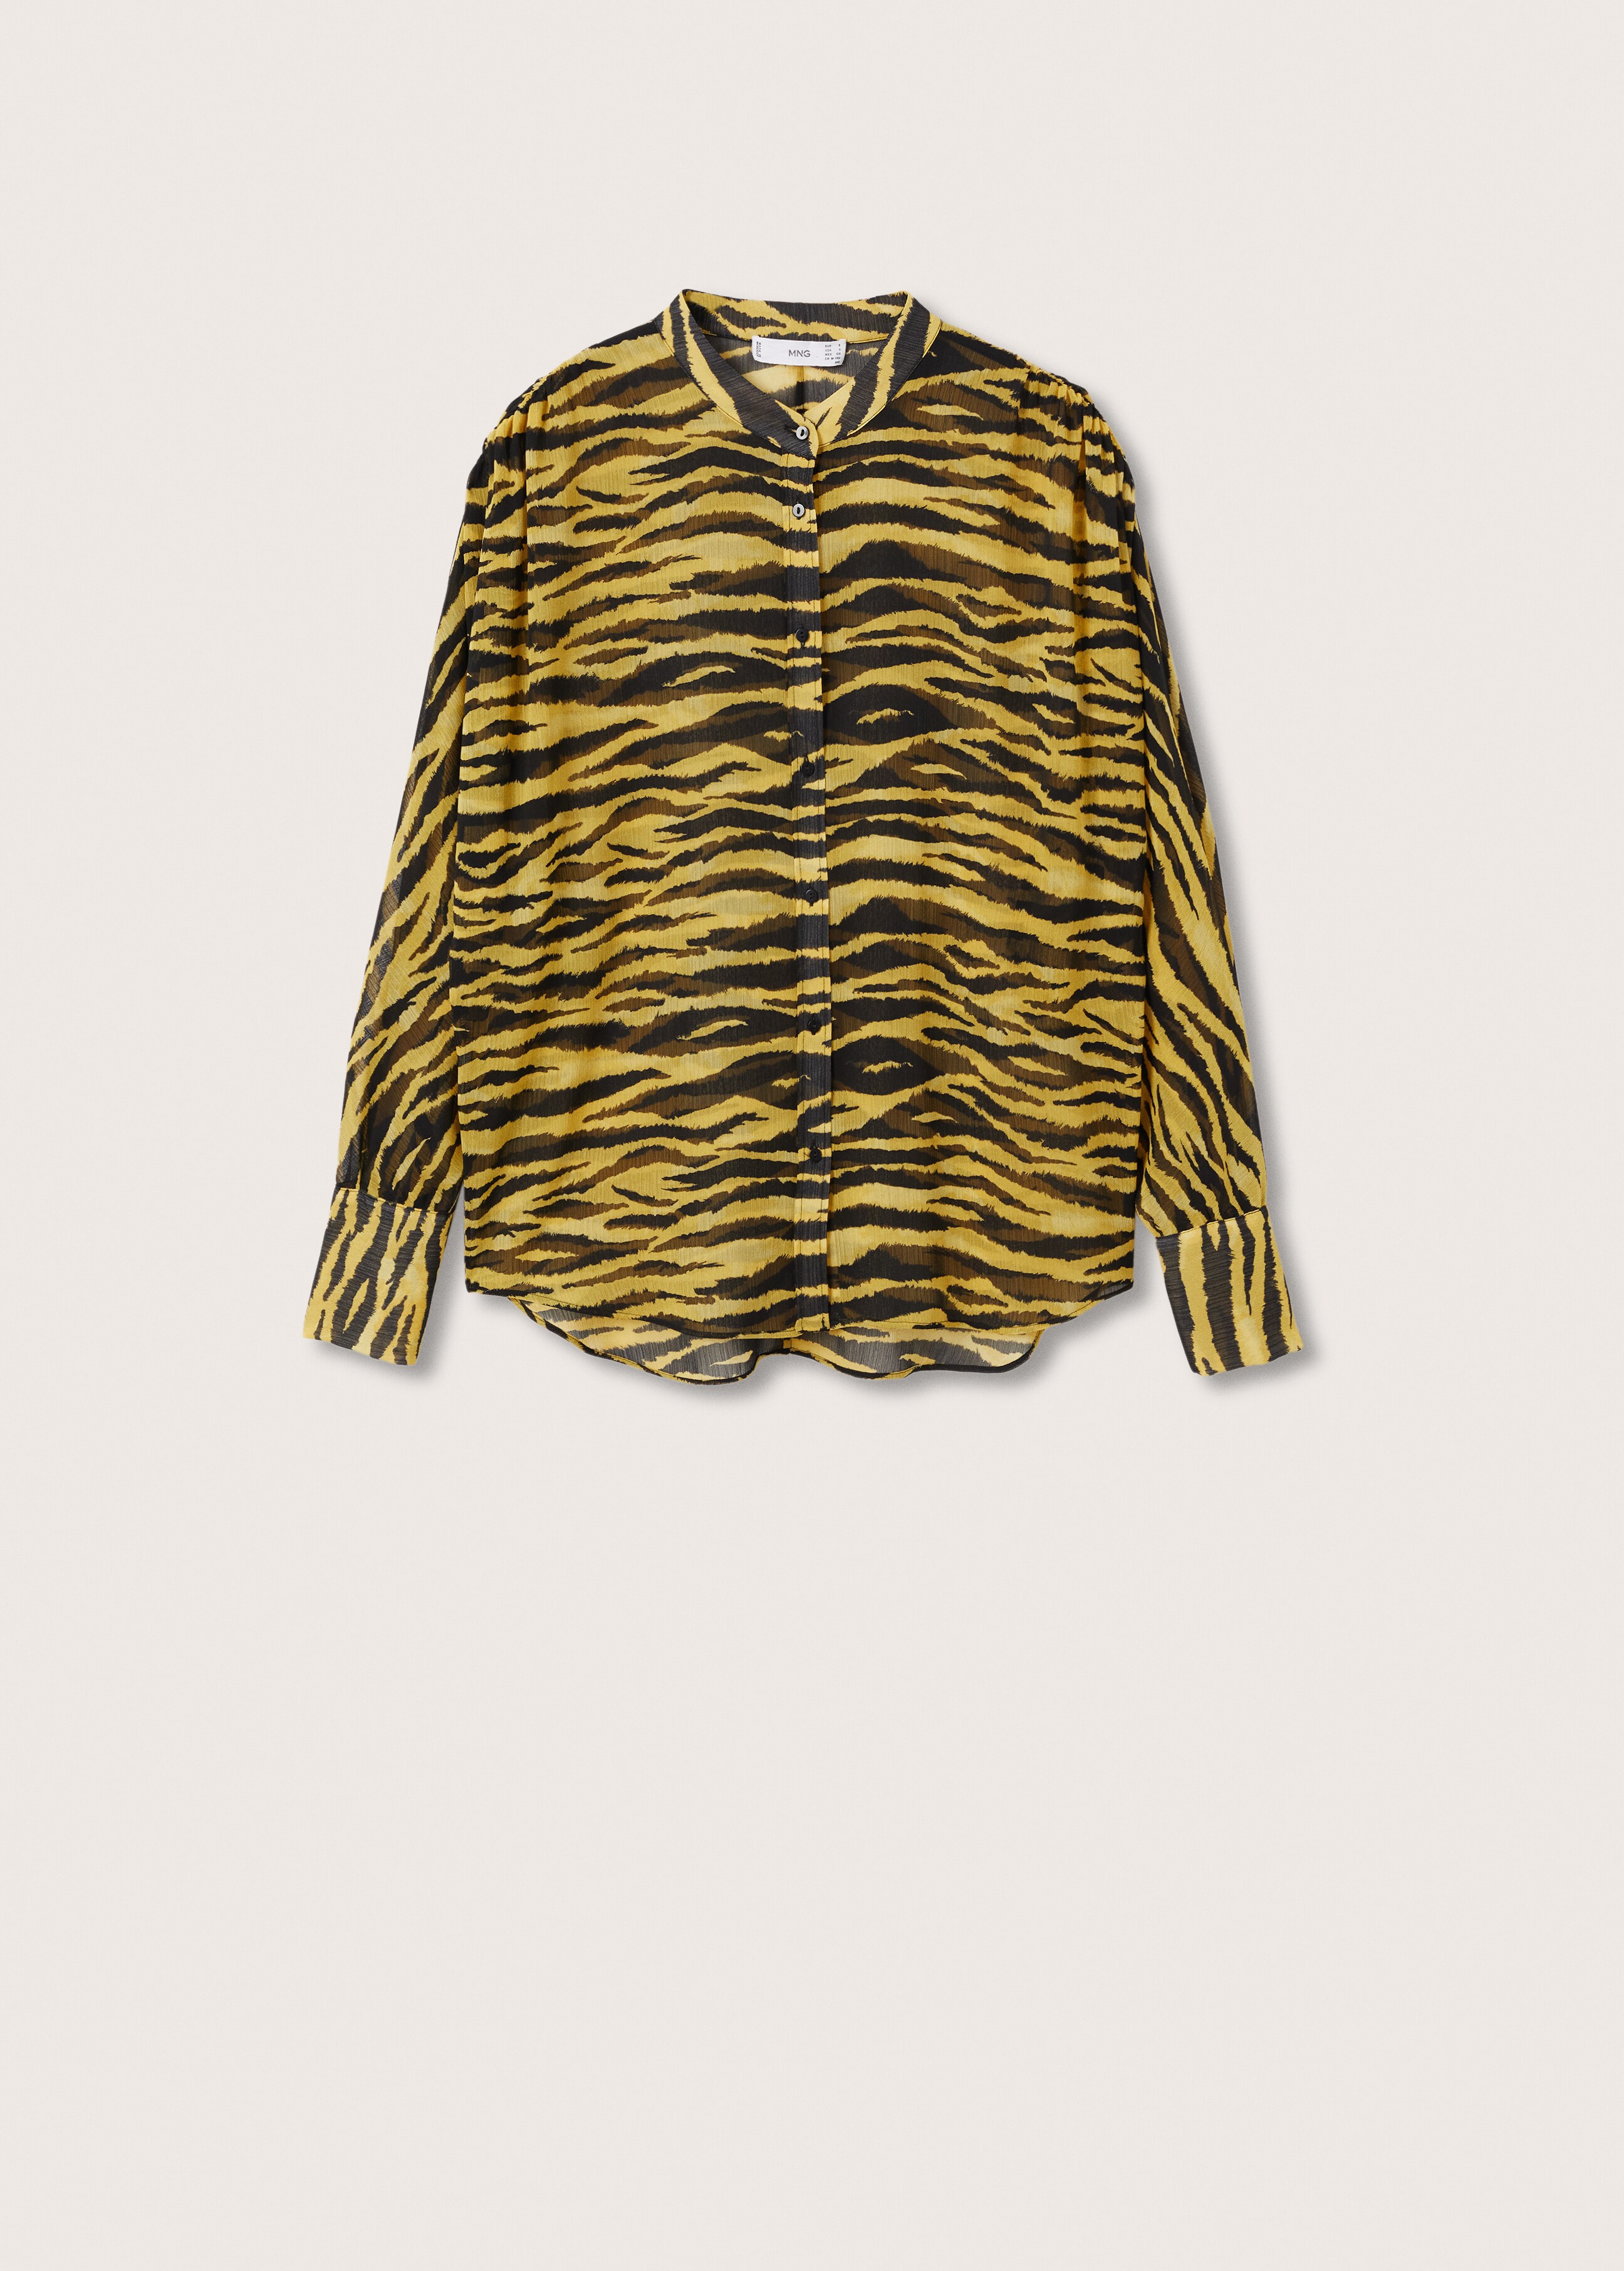 Animal print blouse - Article without model